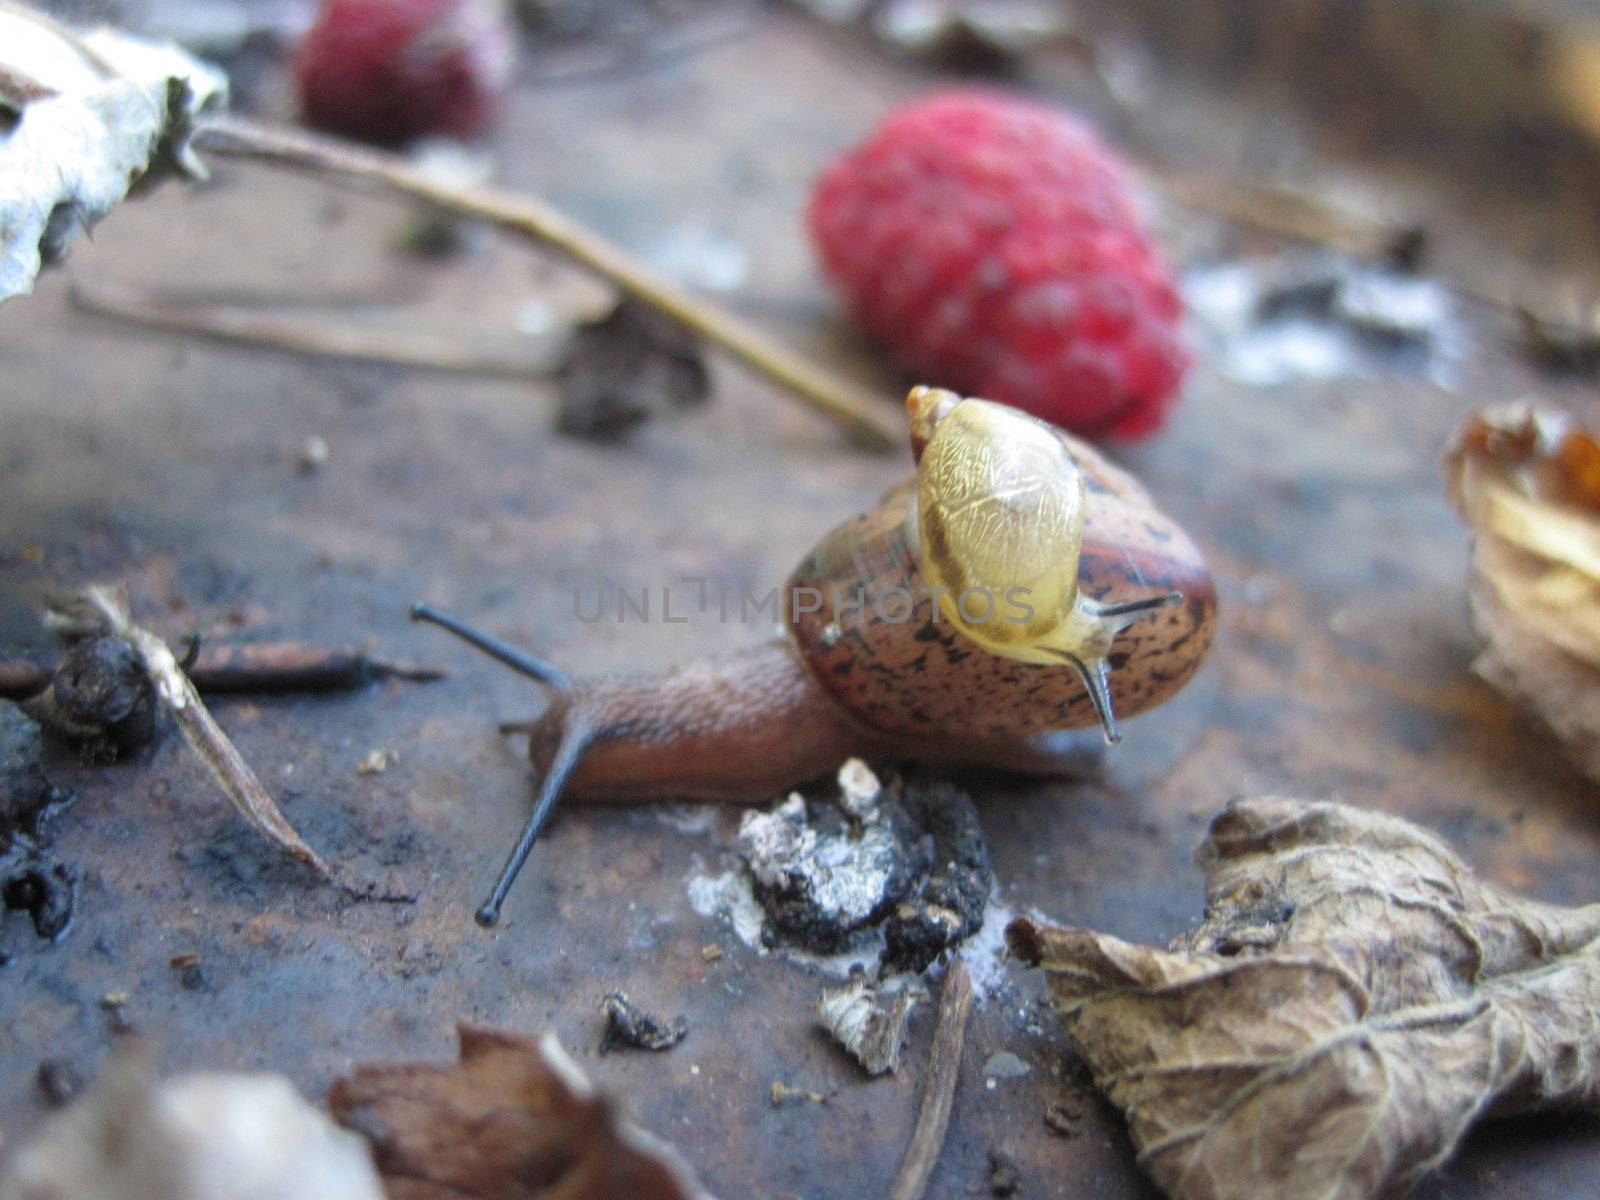 Snail and raspberries by max.domarov